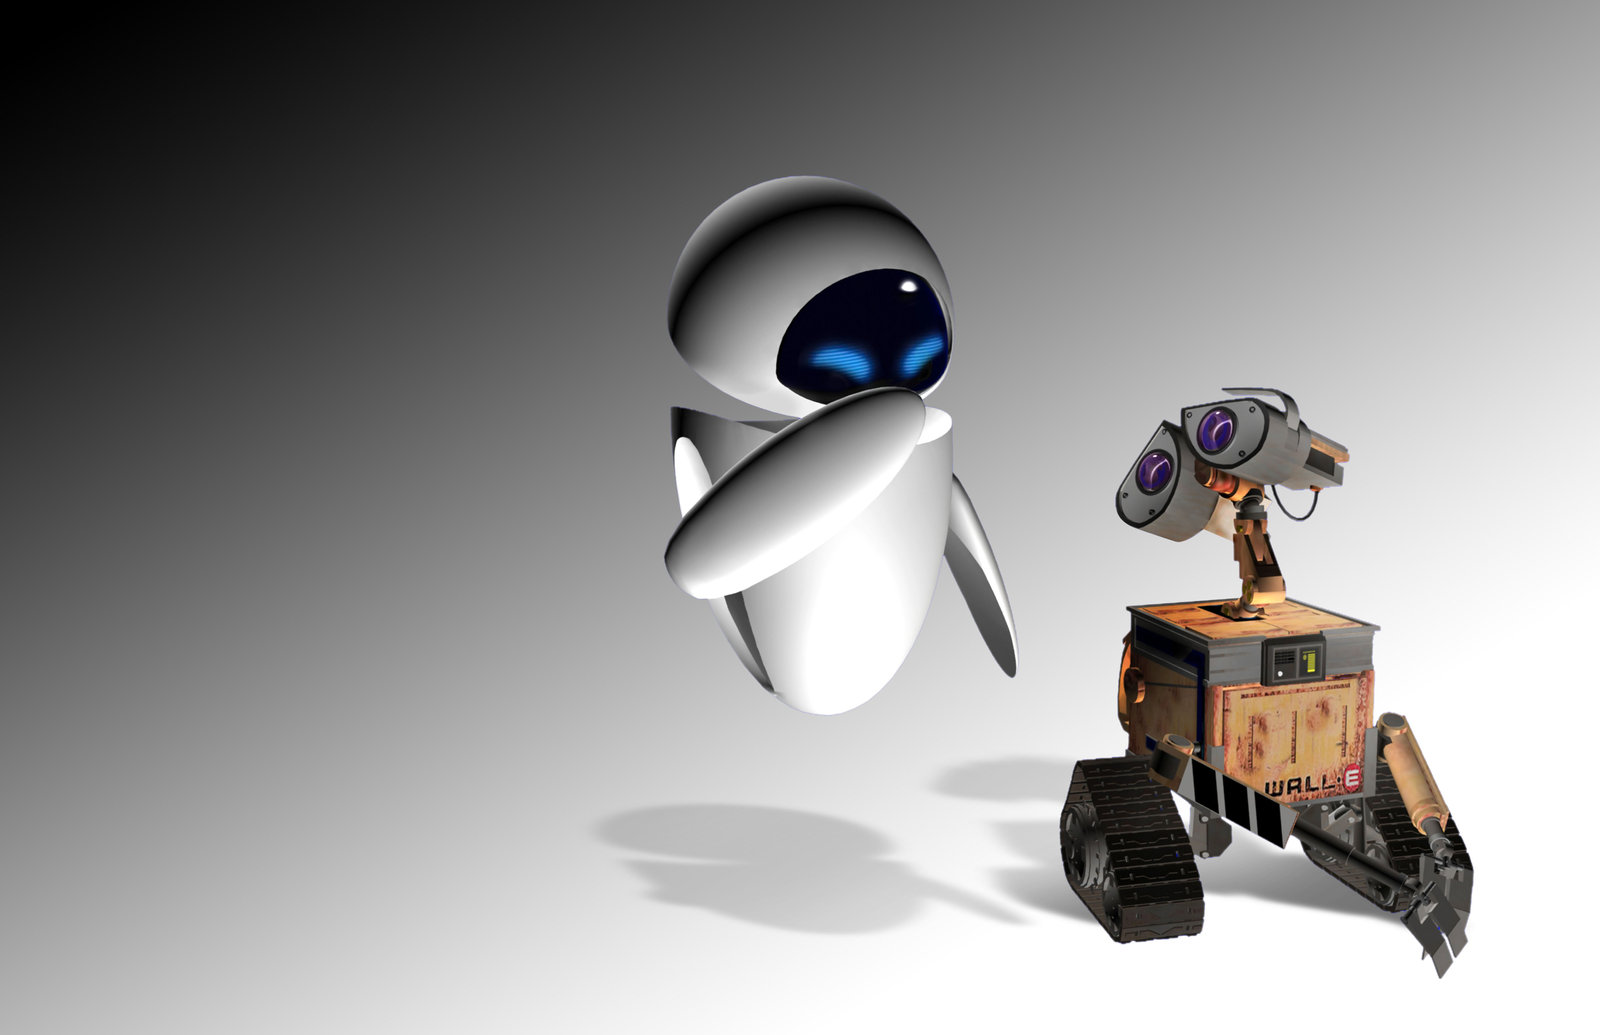 Walle and Eve wallpaper by LexMikel  Download on ZEDGE  e1c2